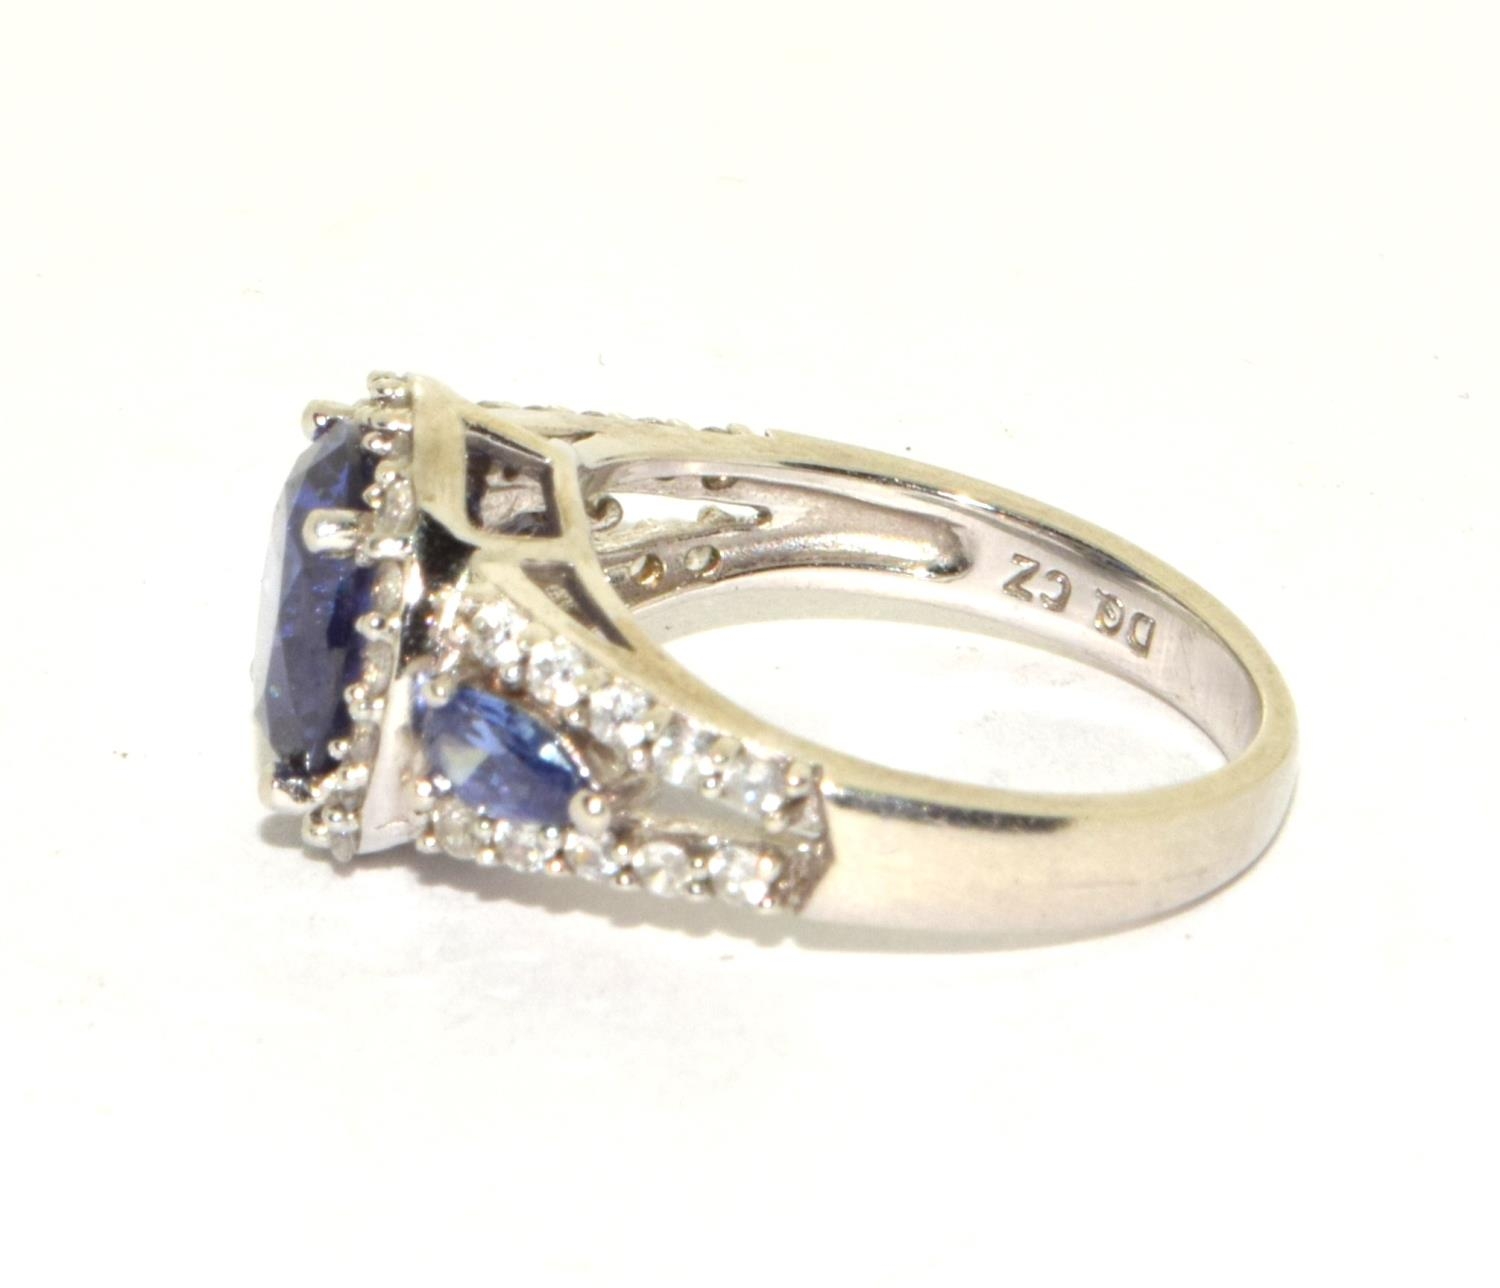 A stunning w/g on 925 silver DQCZ and tanzanite ring Size N - Image 2 of 3